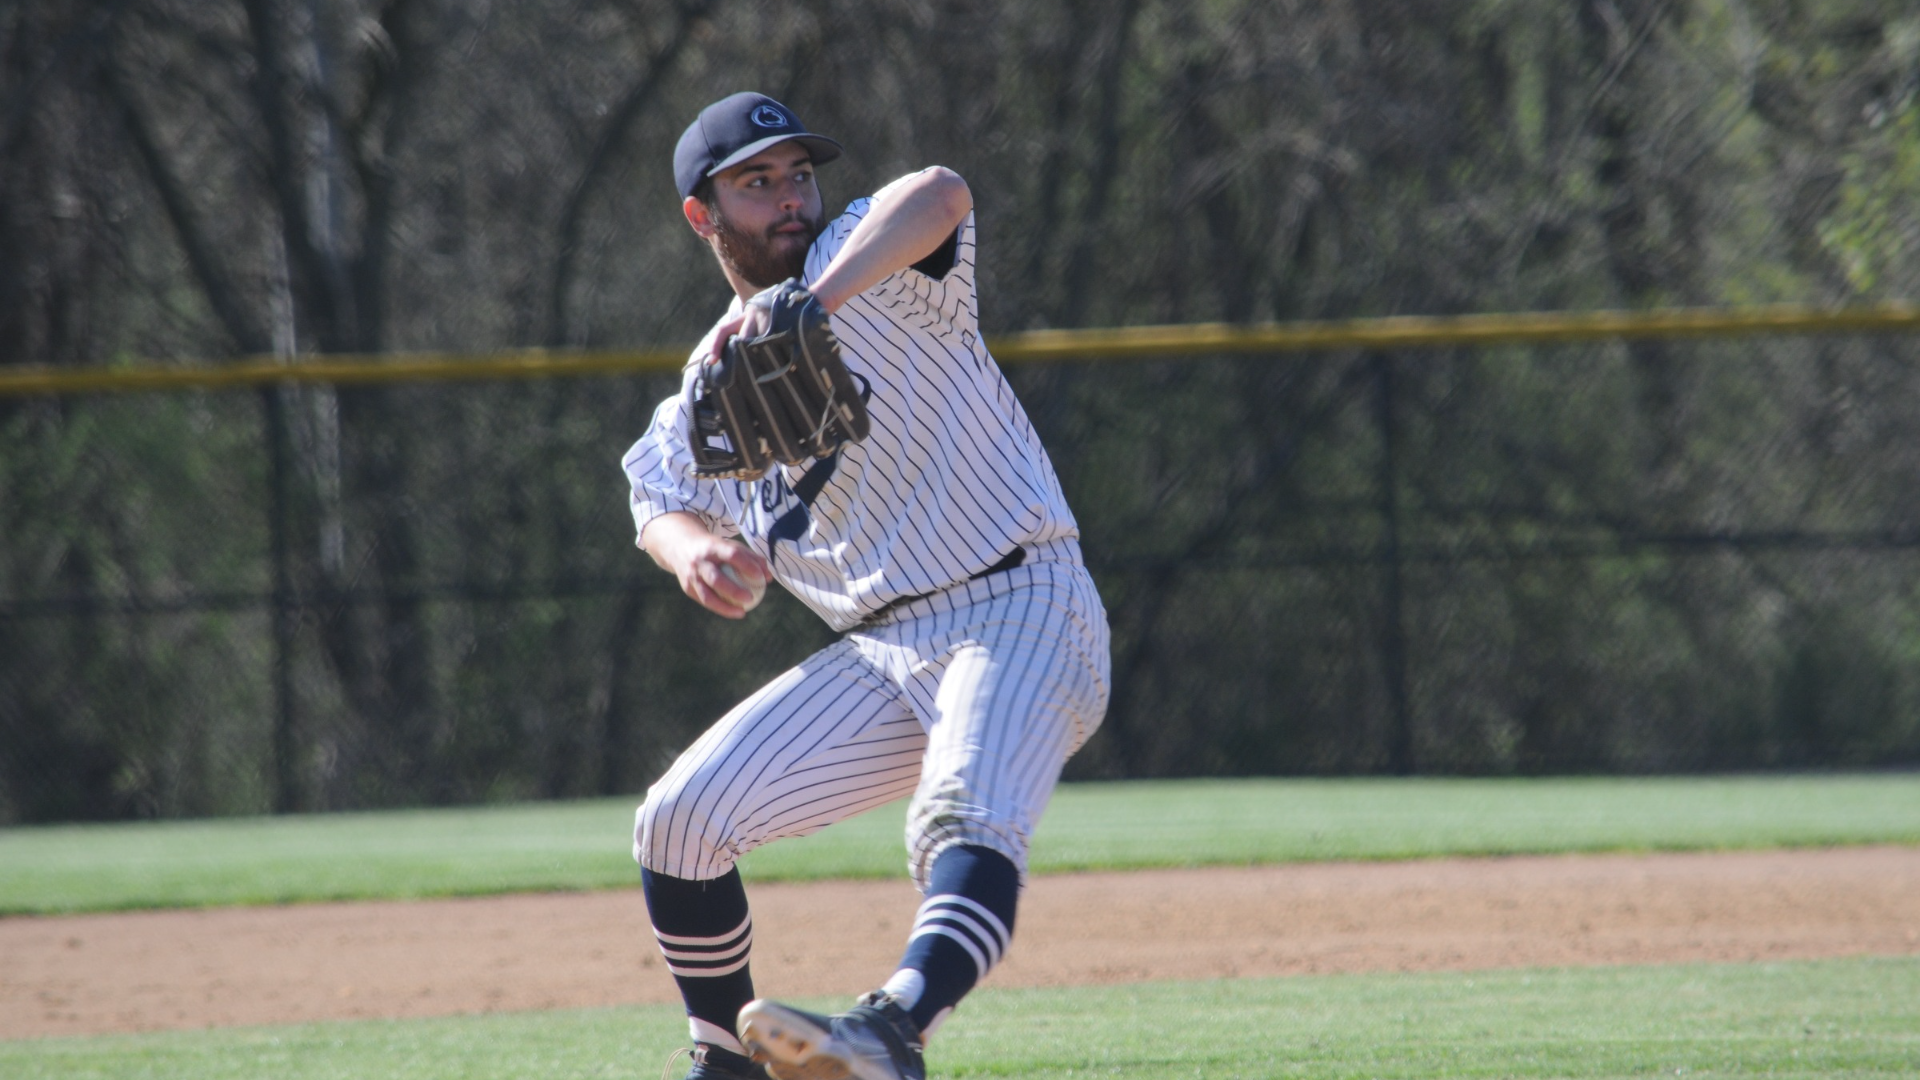 Senior Mark Longo earned the win on the mound in the second game of the double header against Hazleton on Saturday.